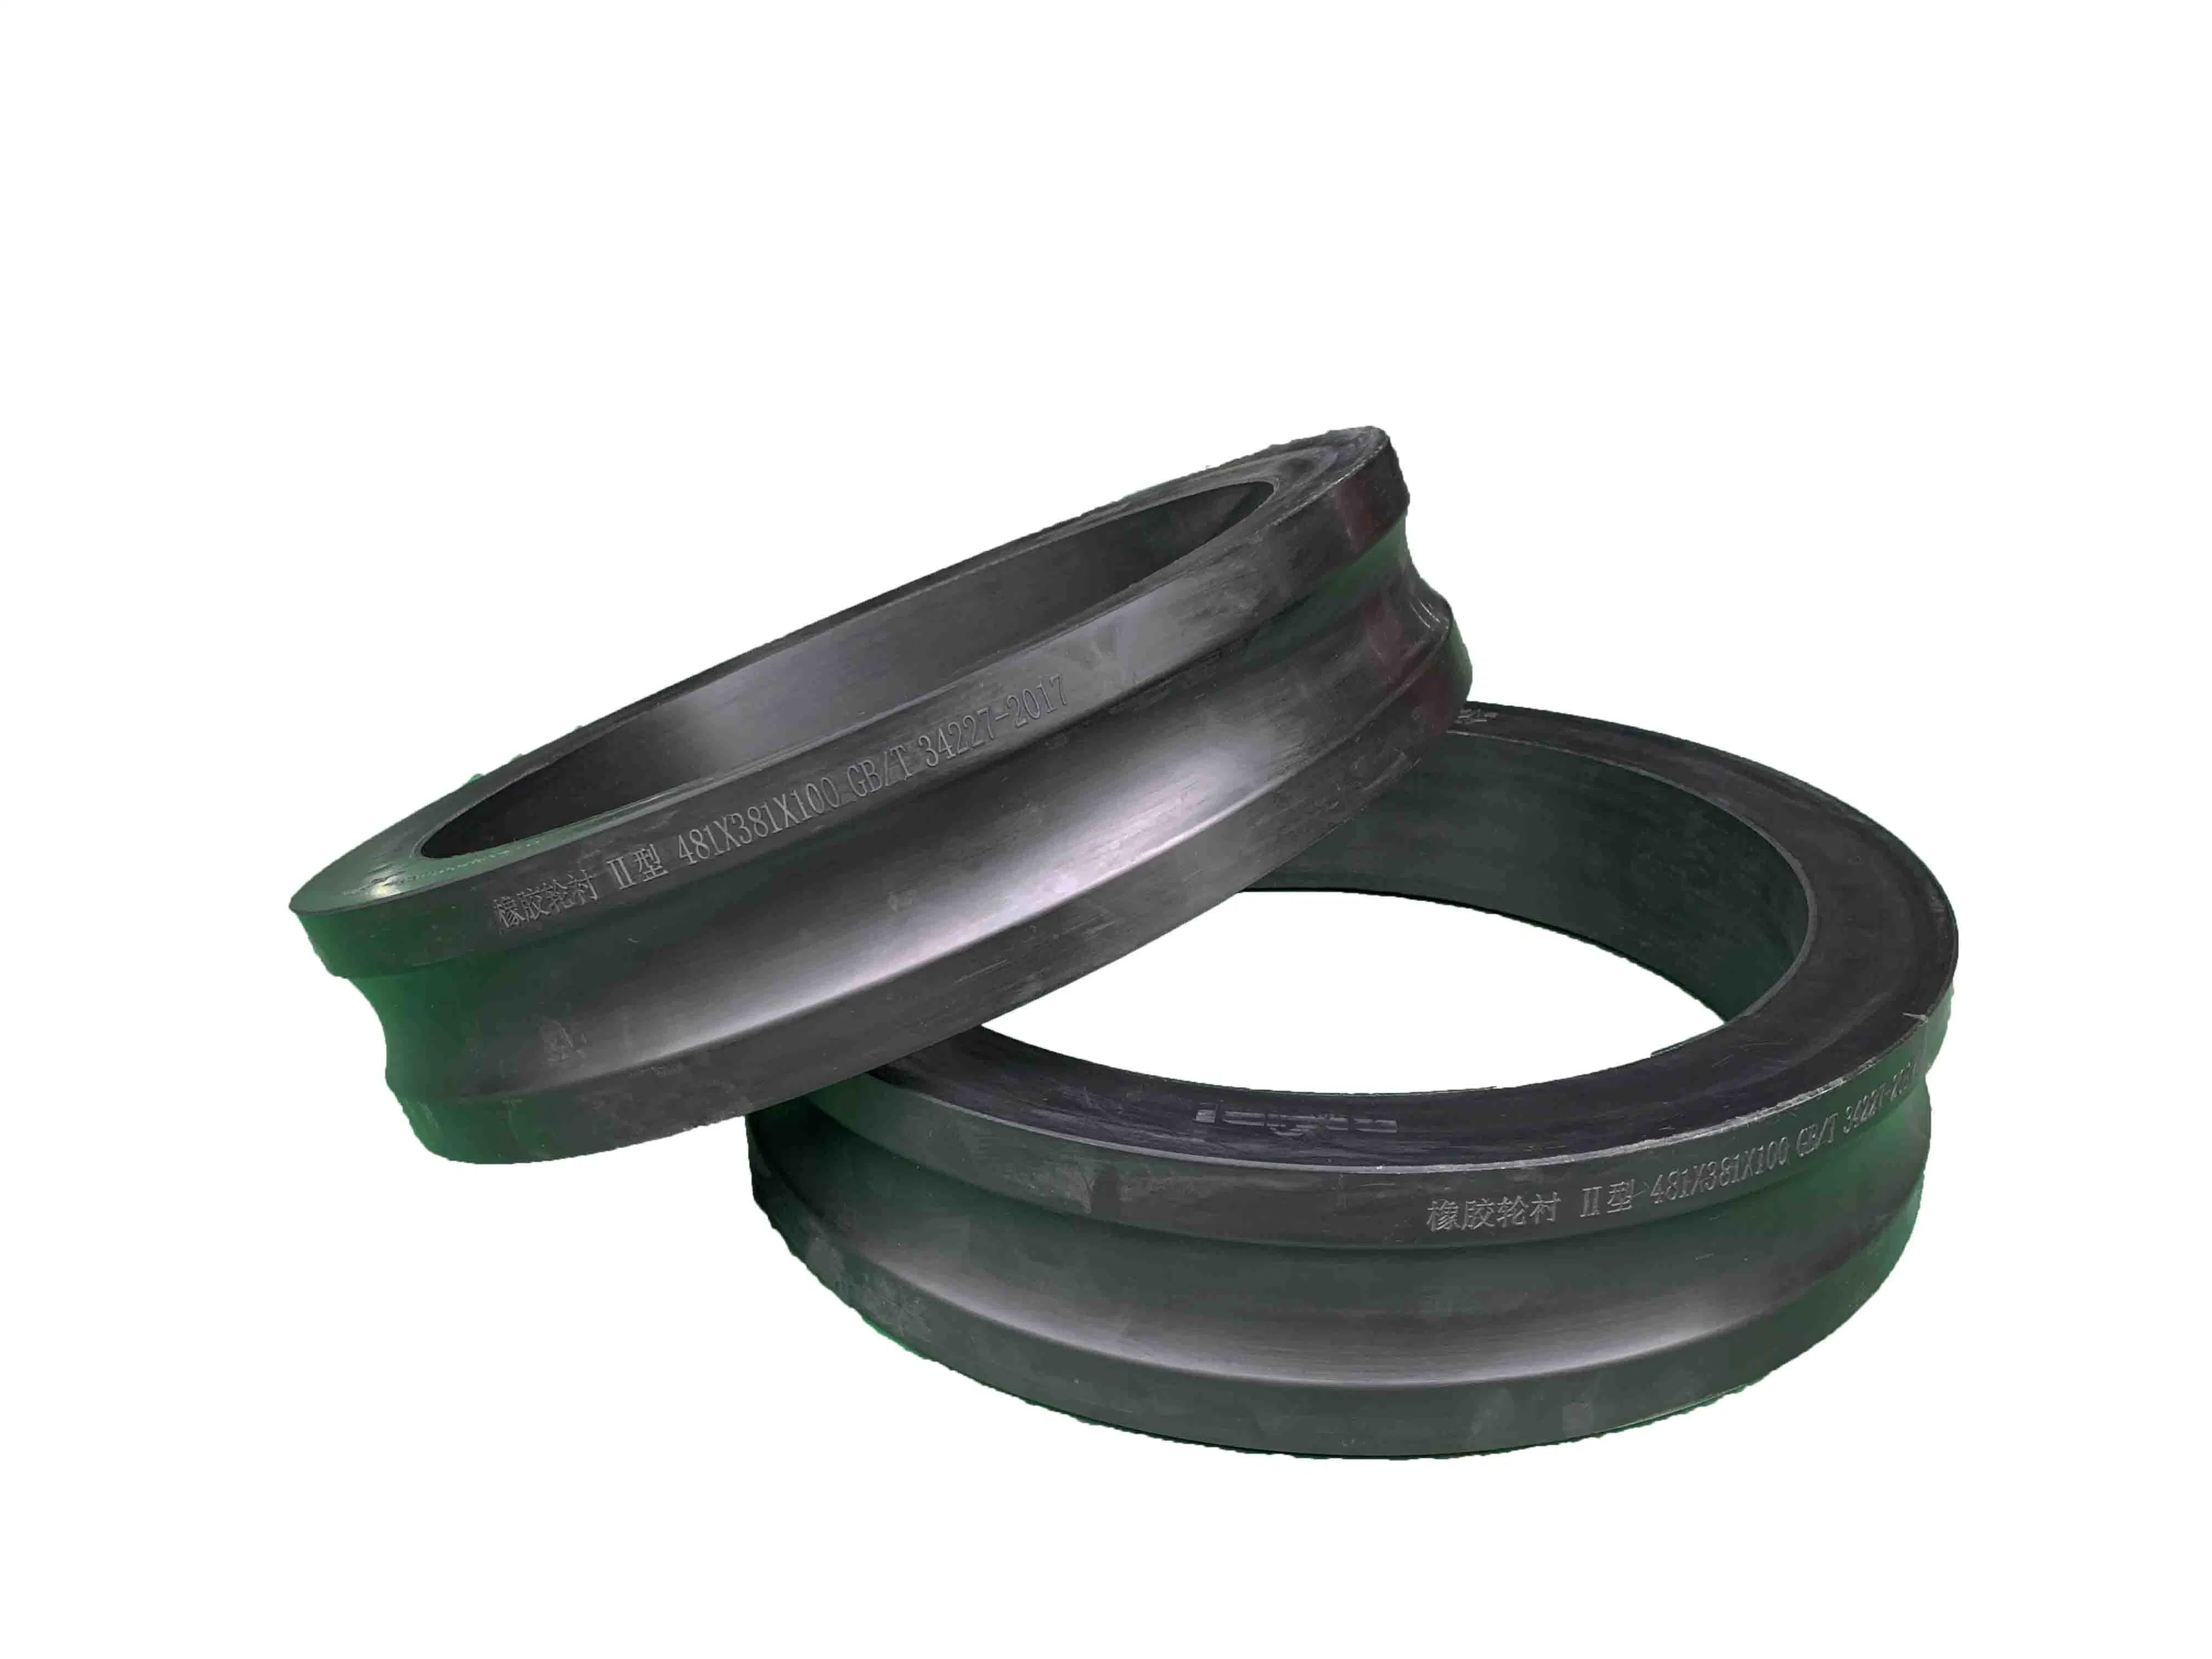 Cableway Rubber Accessories Rubber Sheave Liner Wheel Lining for Air Passenger Cableway